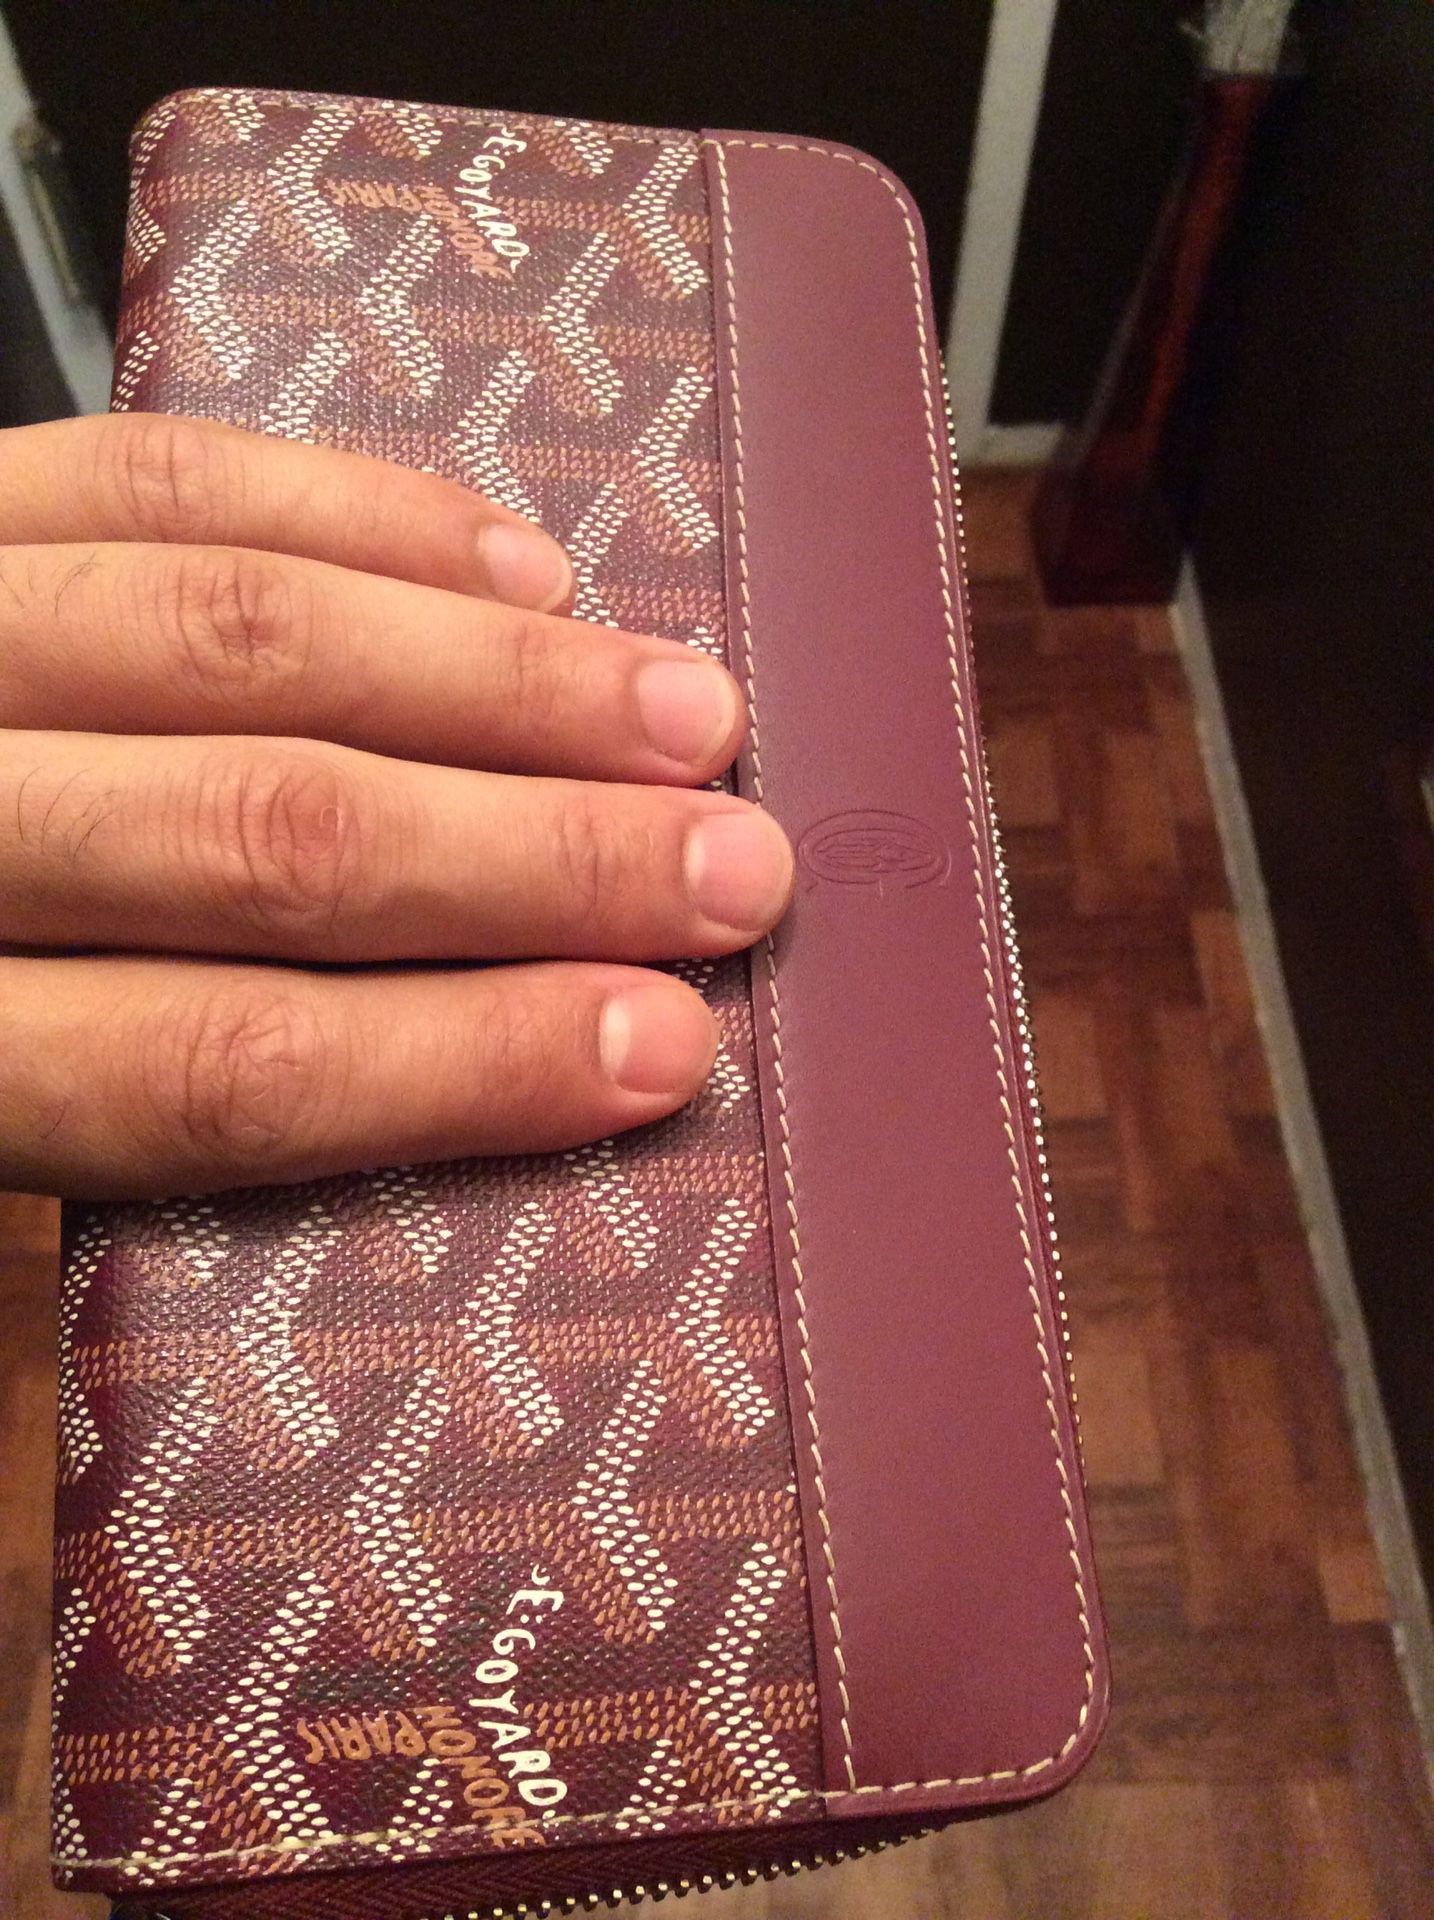 Goyard matignon long wallet for Sale in Larchmont, NY - OfferUp